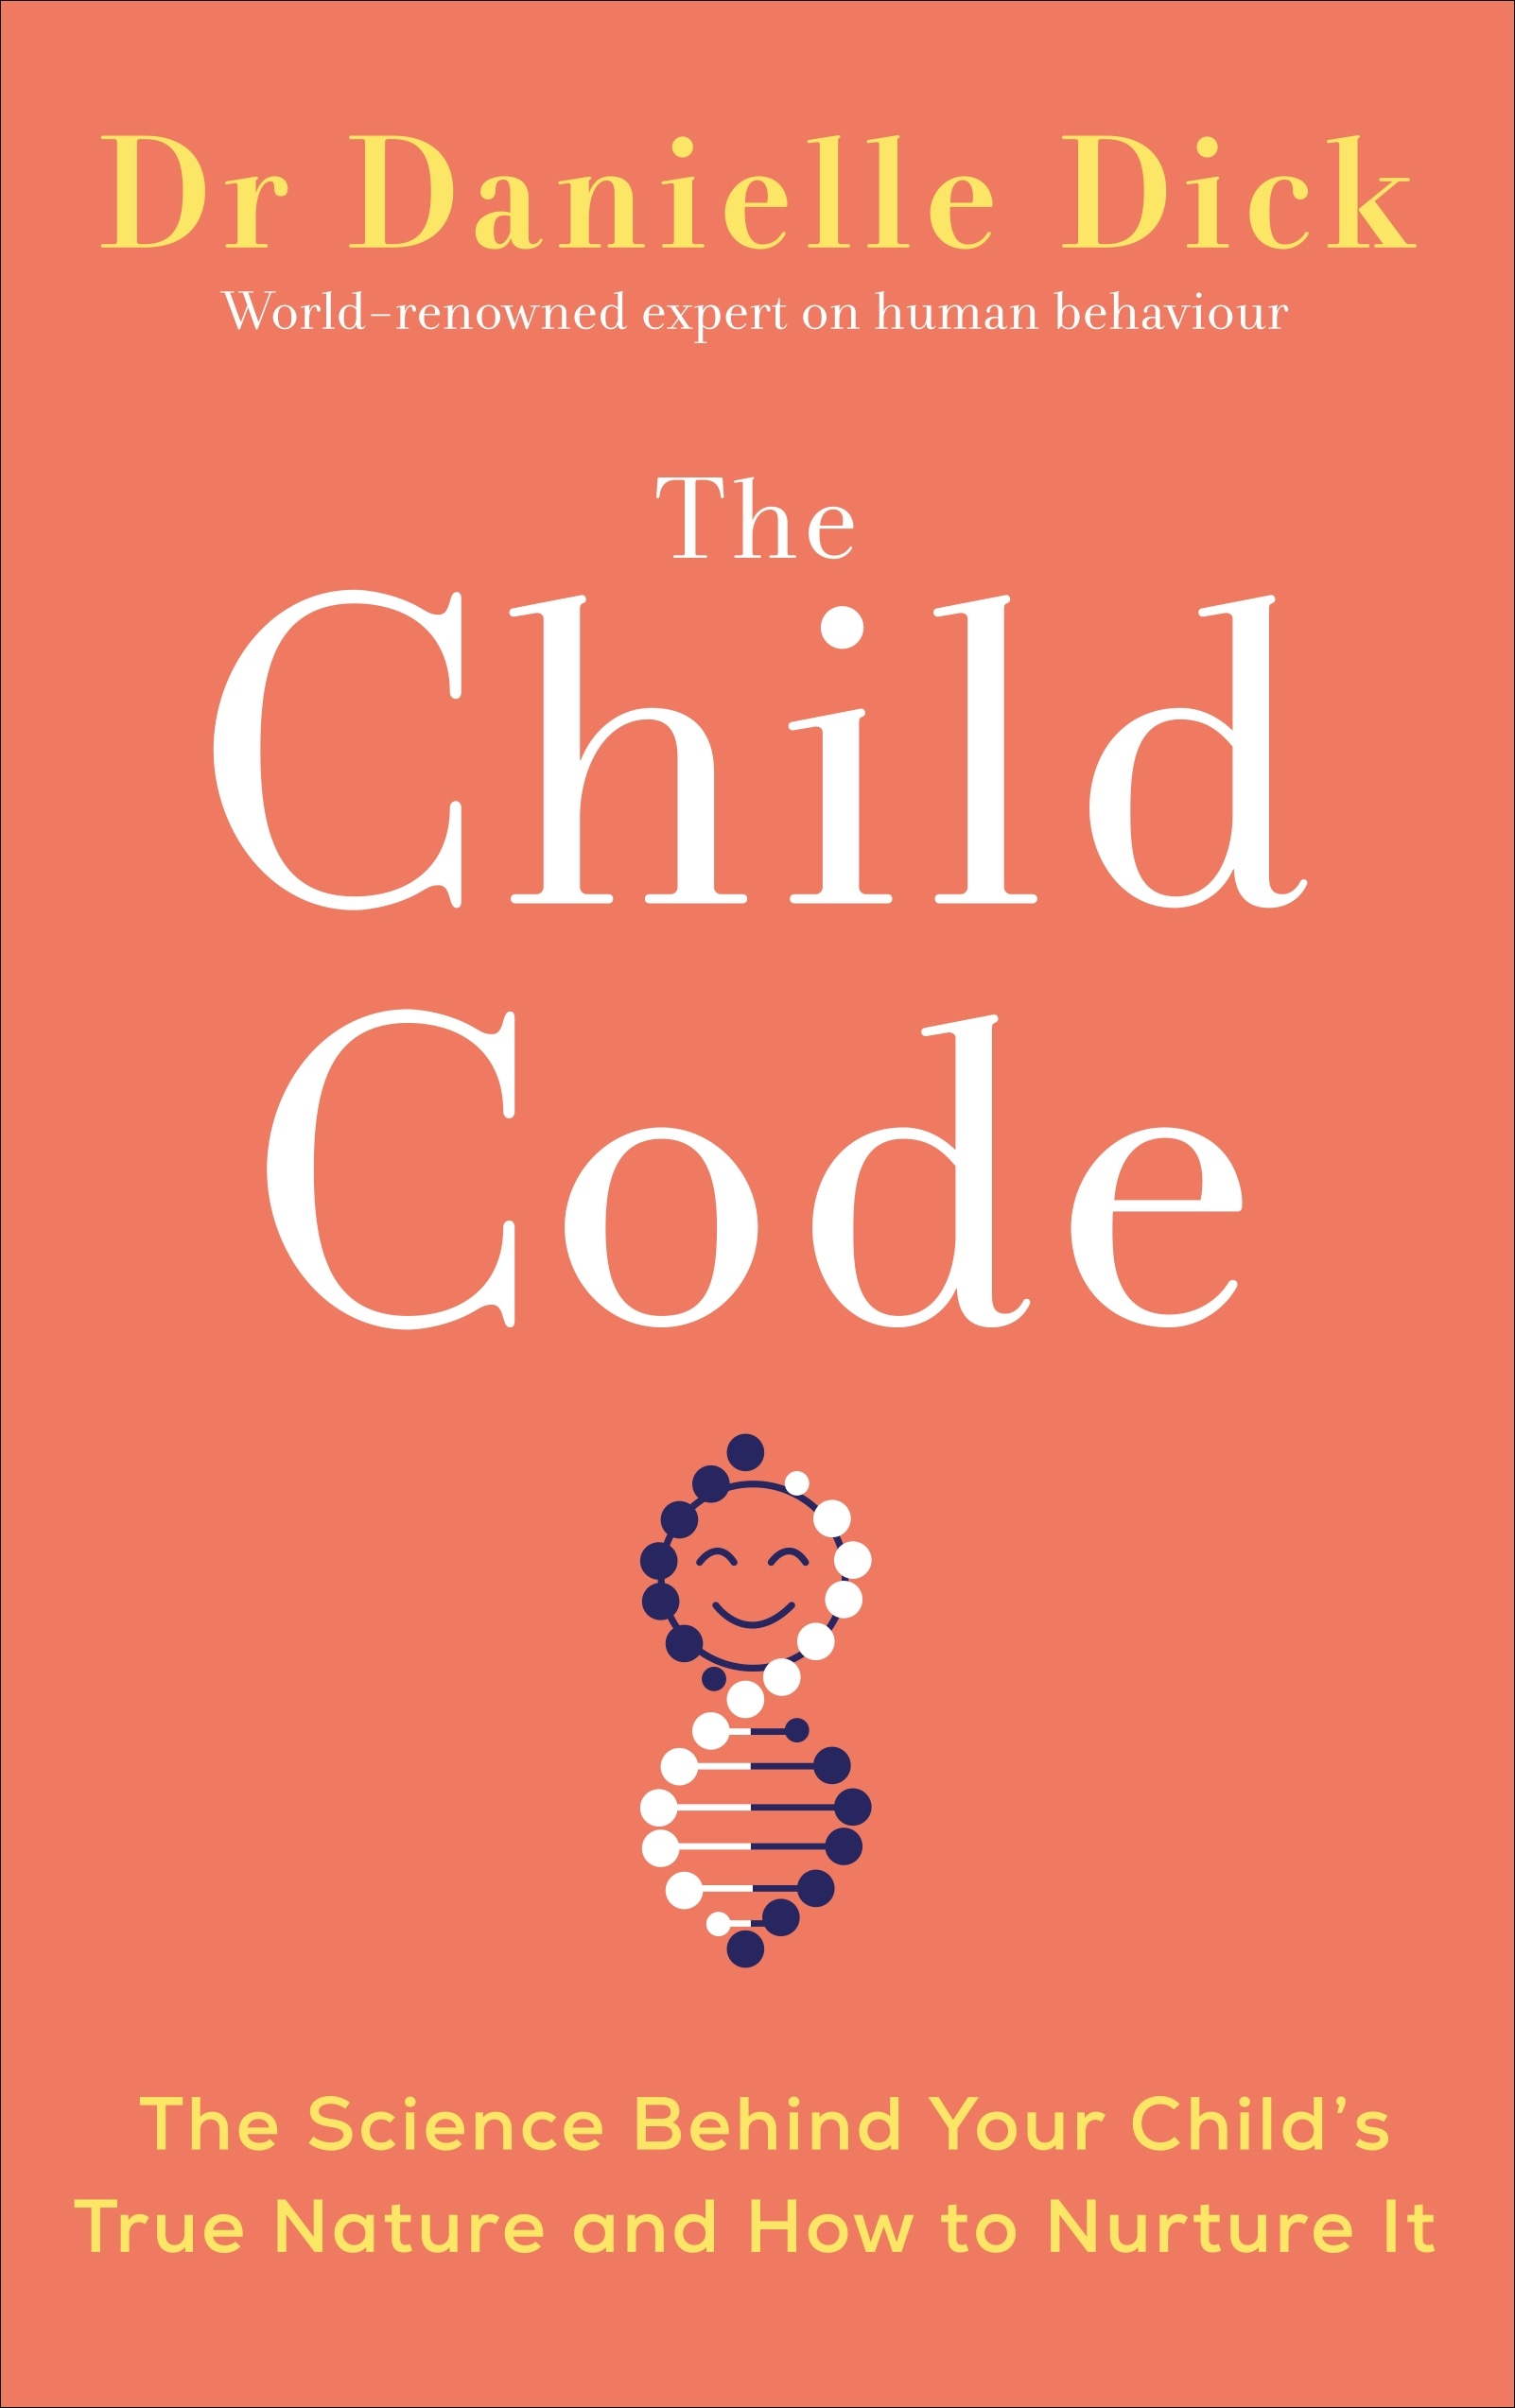 Book “The Child Code” by Danielle Dick — October 7, 2021